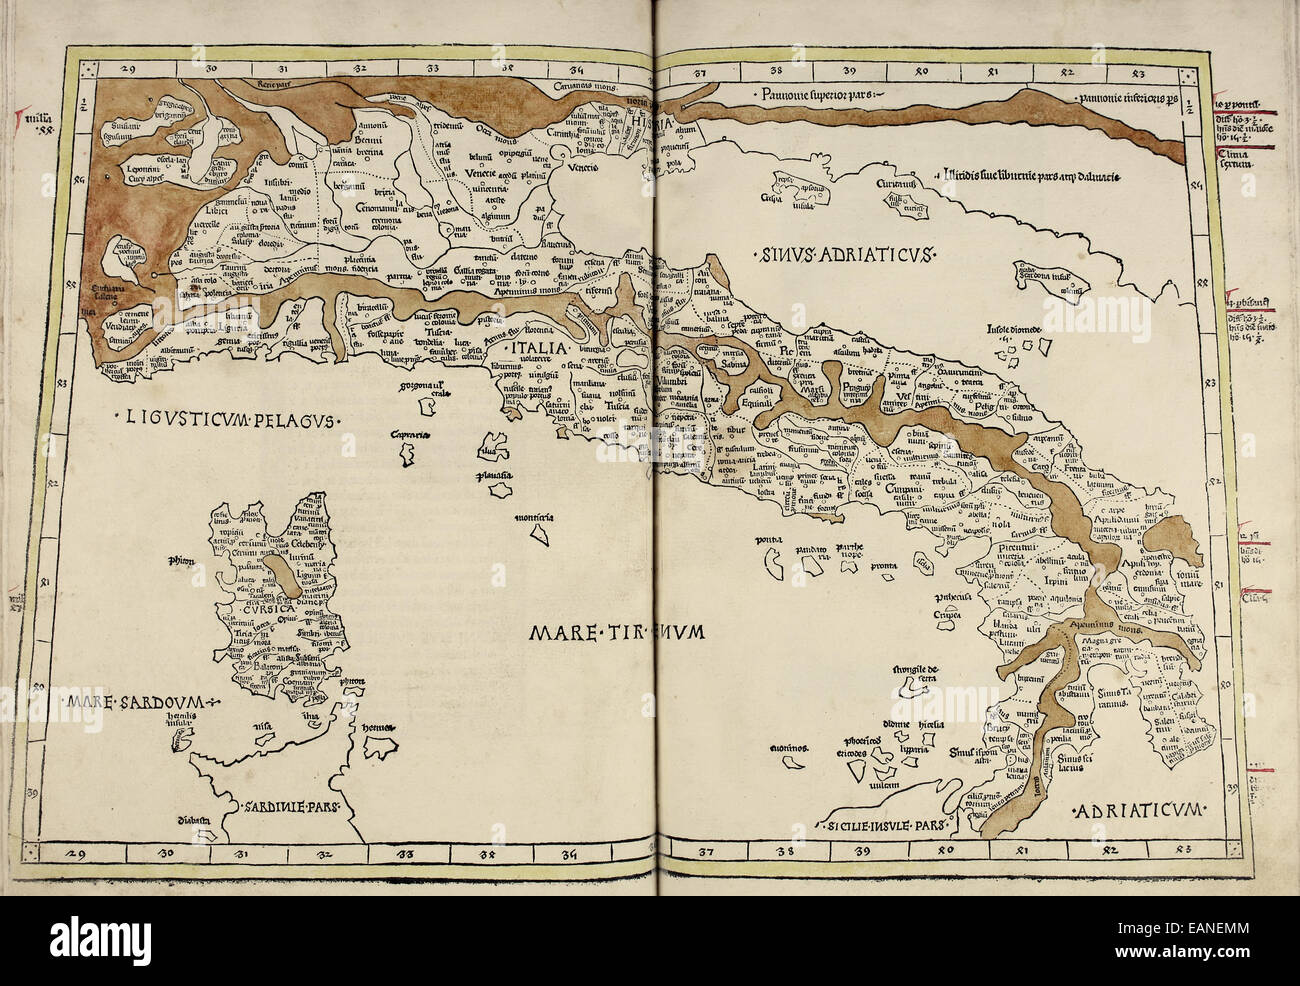 Map of Italy & Corsica from ‘Cosmographia’ by Claudius Ptolemy (Ptolemaeus) (90-168AD). See description for more information. Stock Photo